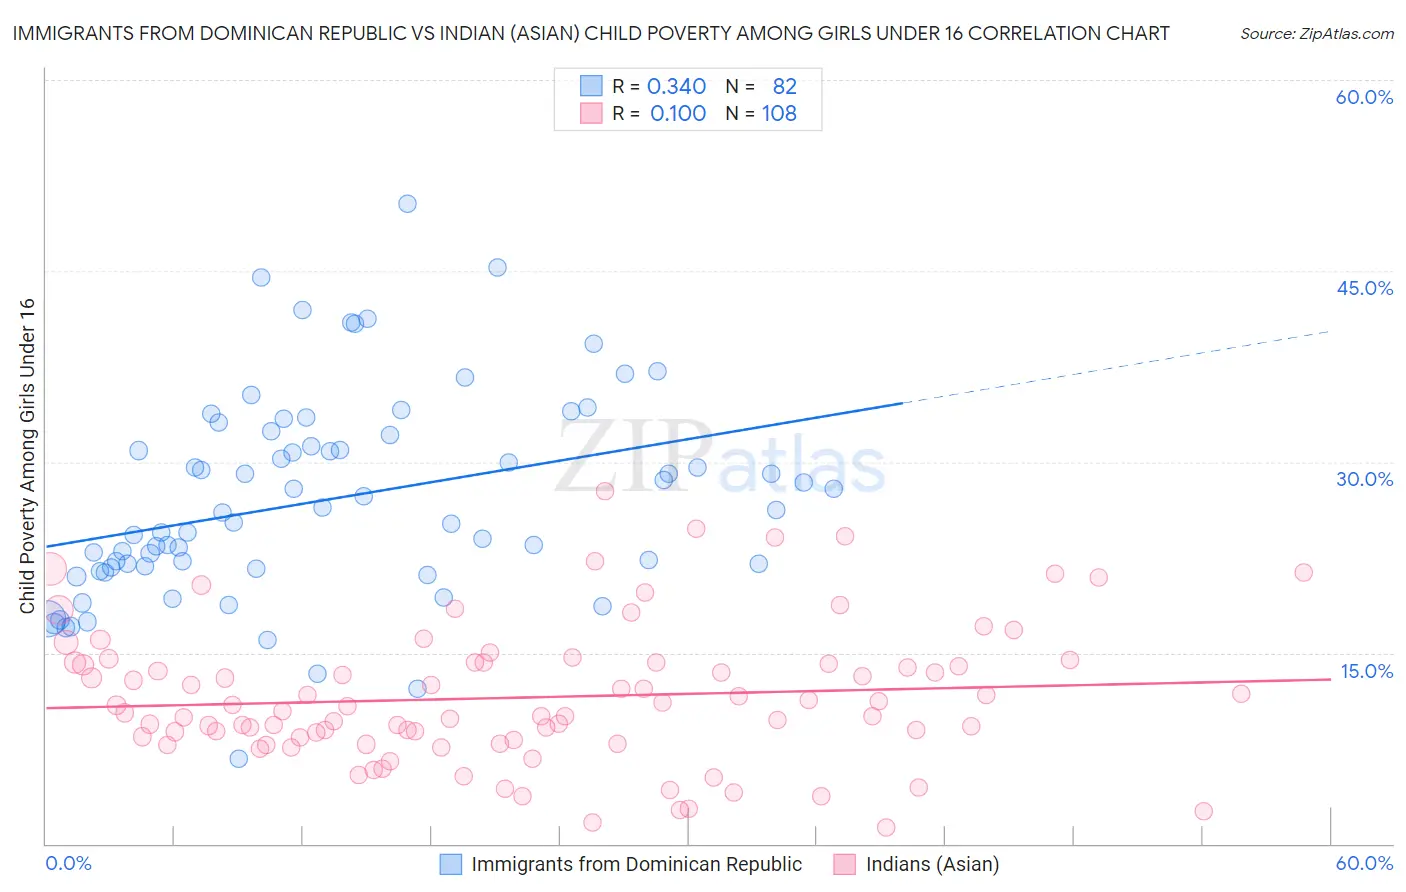 Immigrants from Dominican Republic vs Indian (Asian) Child Poverty Among Girls Under 16